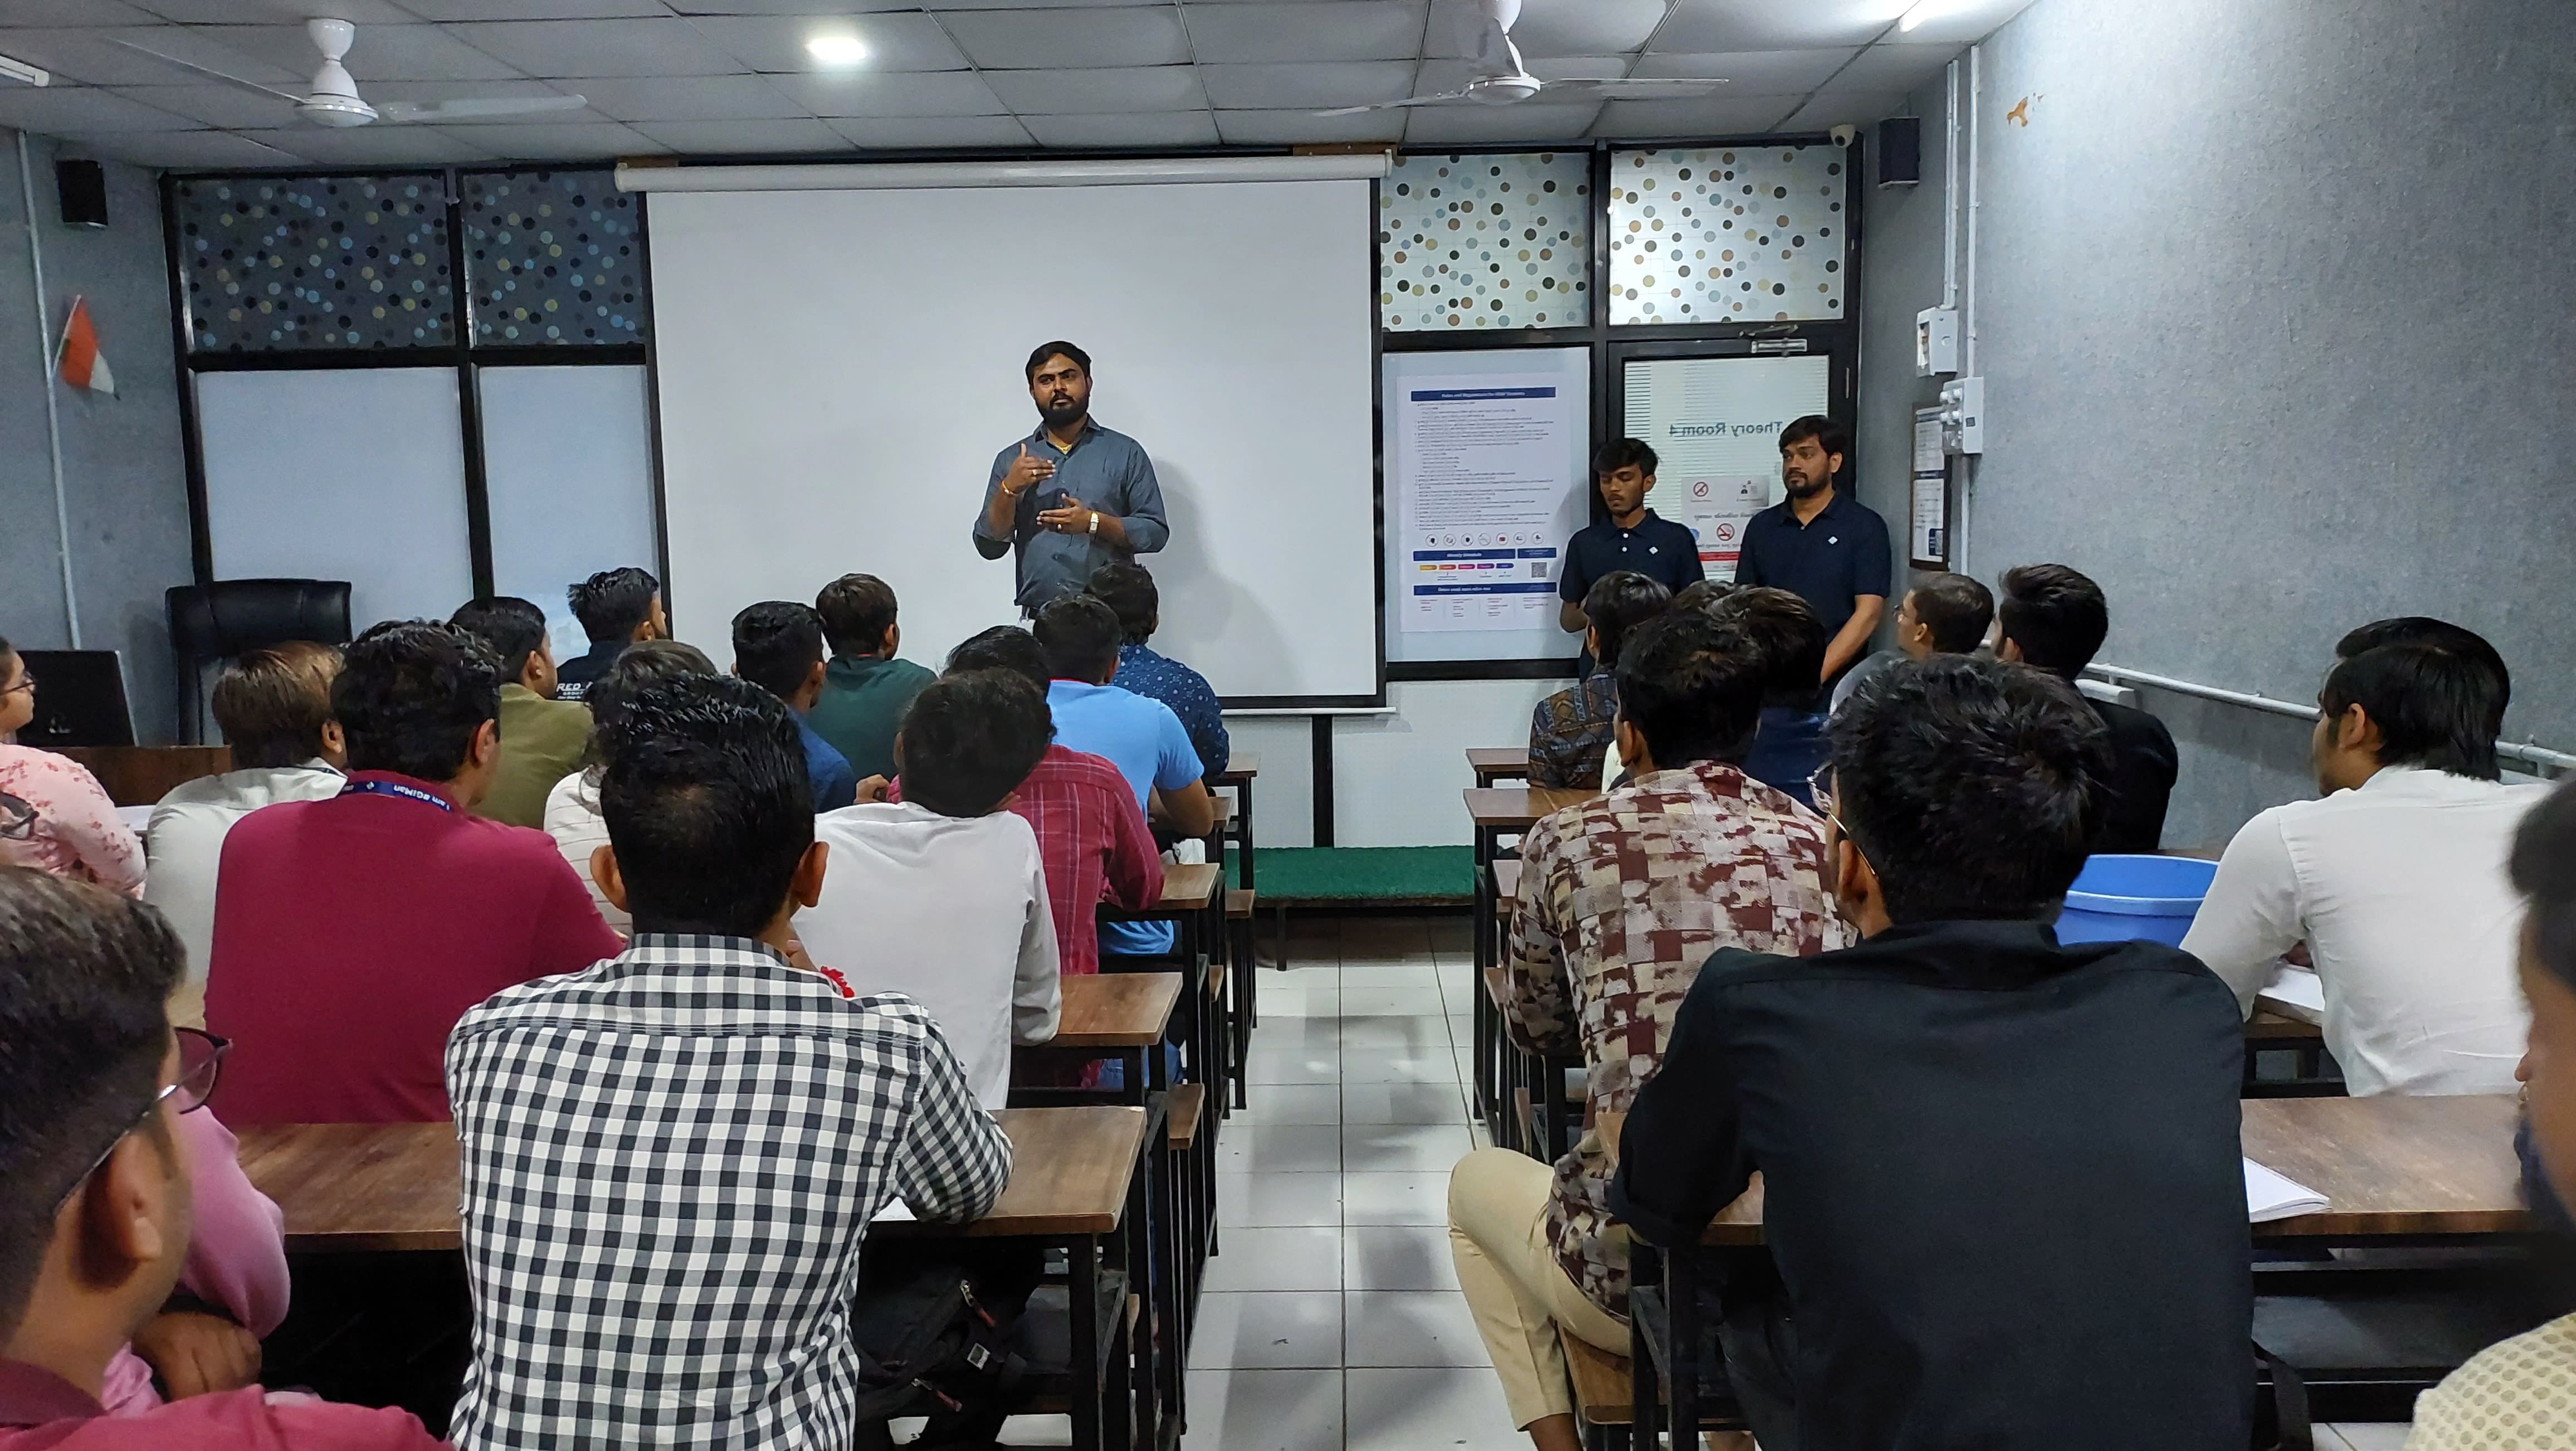 Node js Expert Session conducted by rnwmultimedia